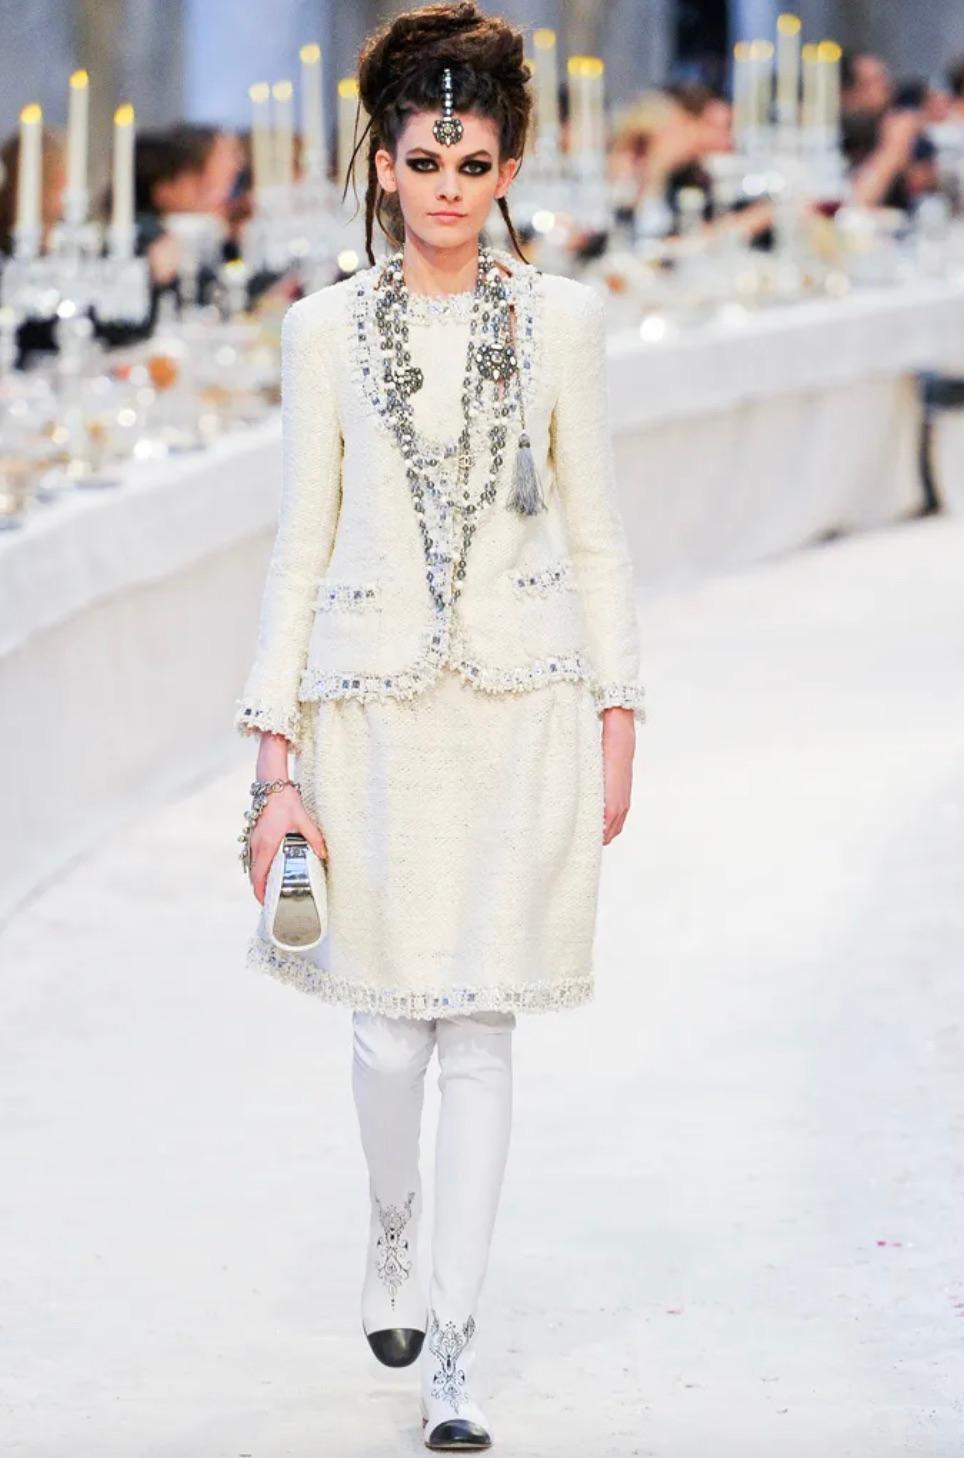 Introducing a breathtaking embellished skirt suit from the Chanel Metiers D'Art Pre-Fall 2012 Paris-Bombay collection. The Metiers D'Art collections are the epitome of craftsmanship in the world of ready-to-wear fashion, right before stepping into